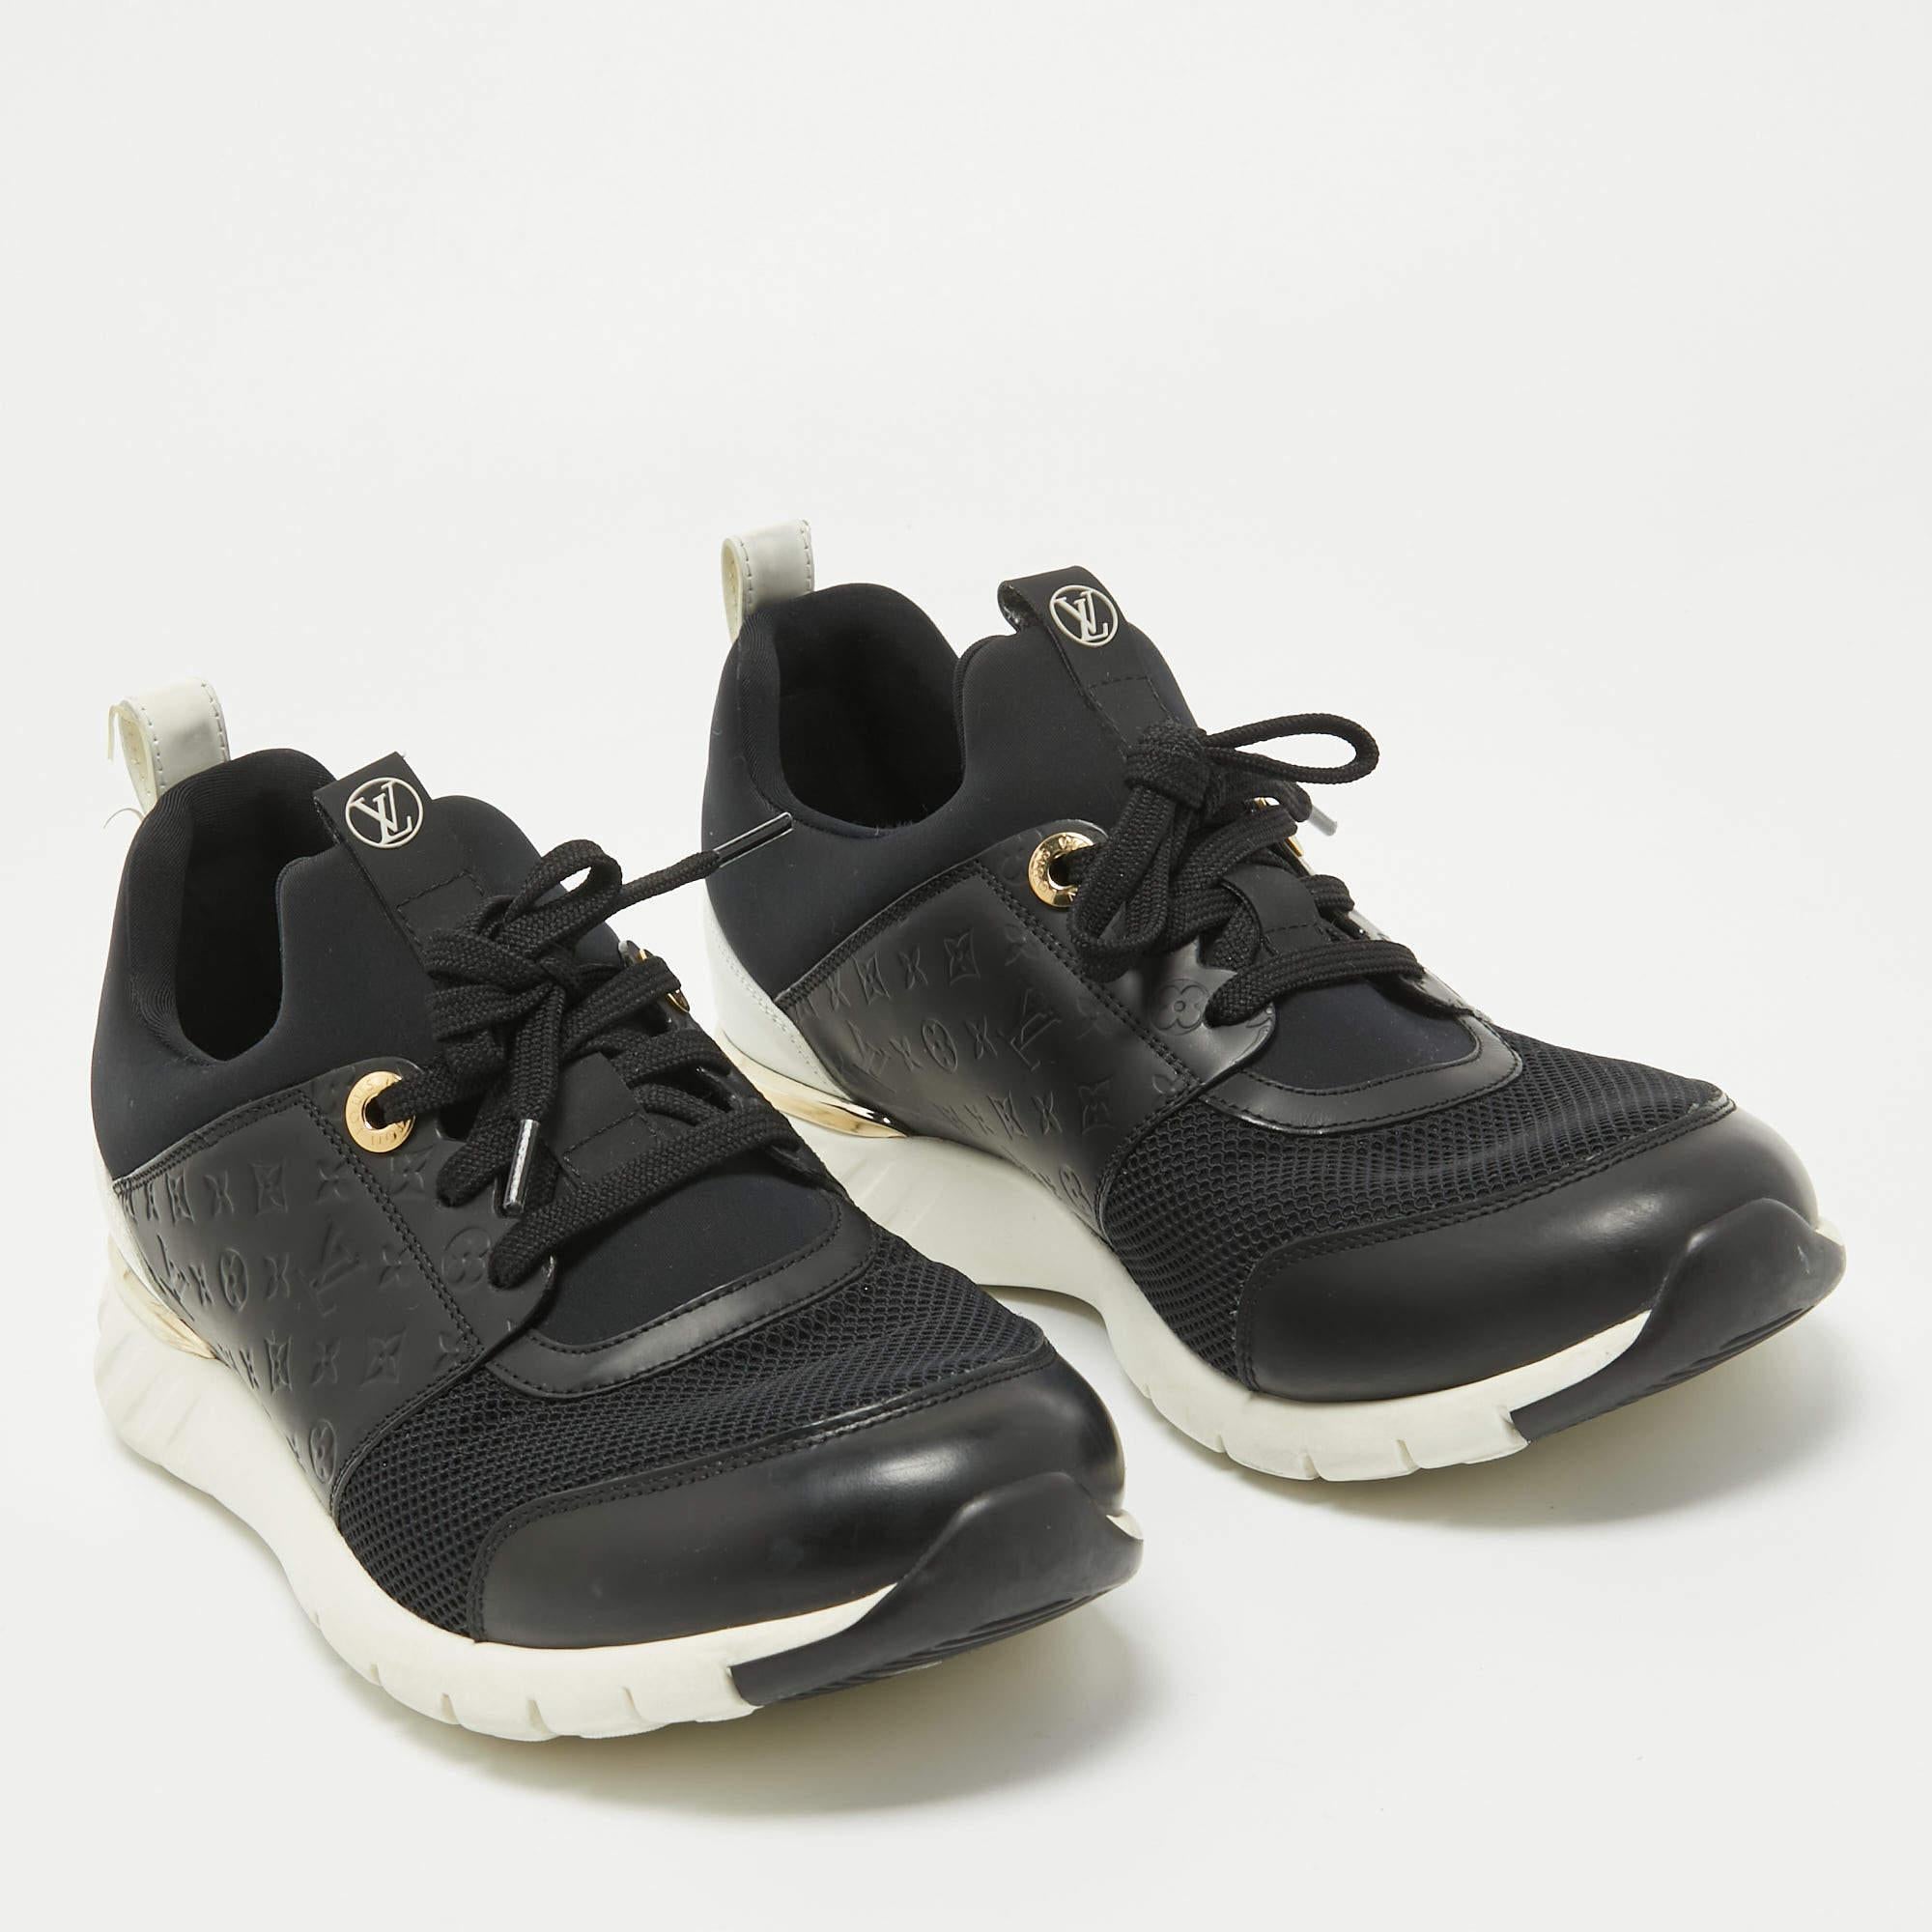 Louis Vuitton Black Mesh and Leather Trainer Sneakers Size 40 In Good Condition For Sale In Dubai, Al Qouz 2